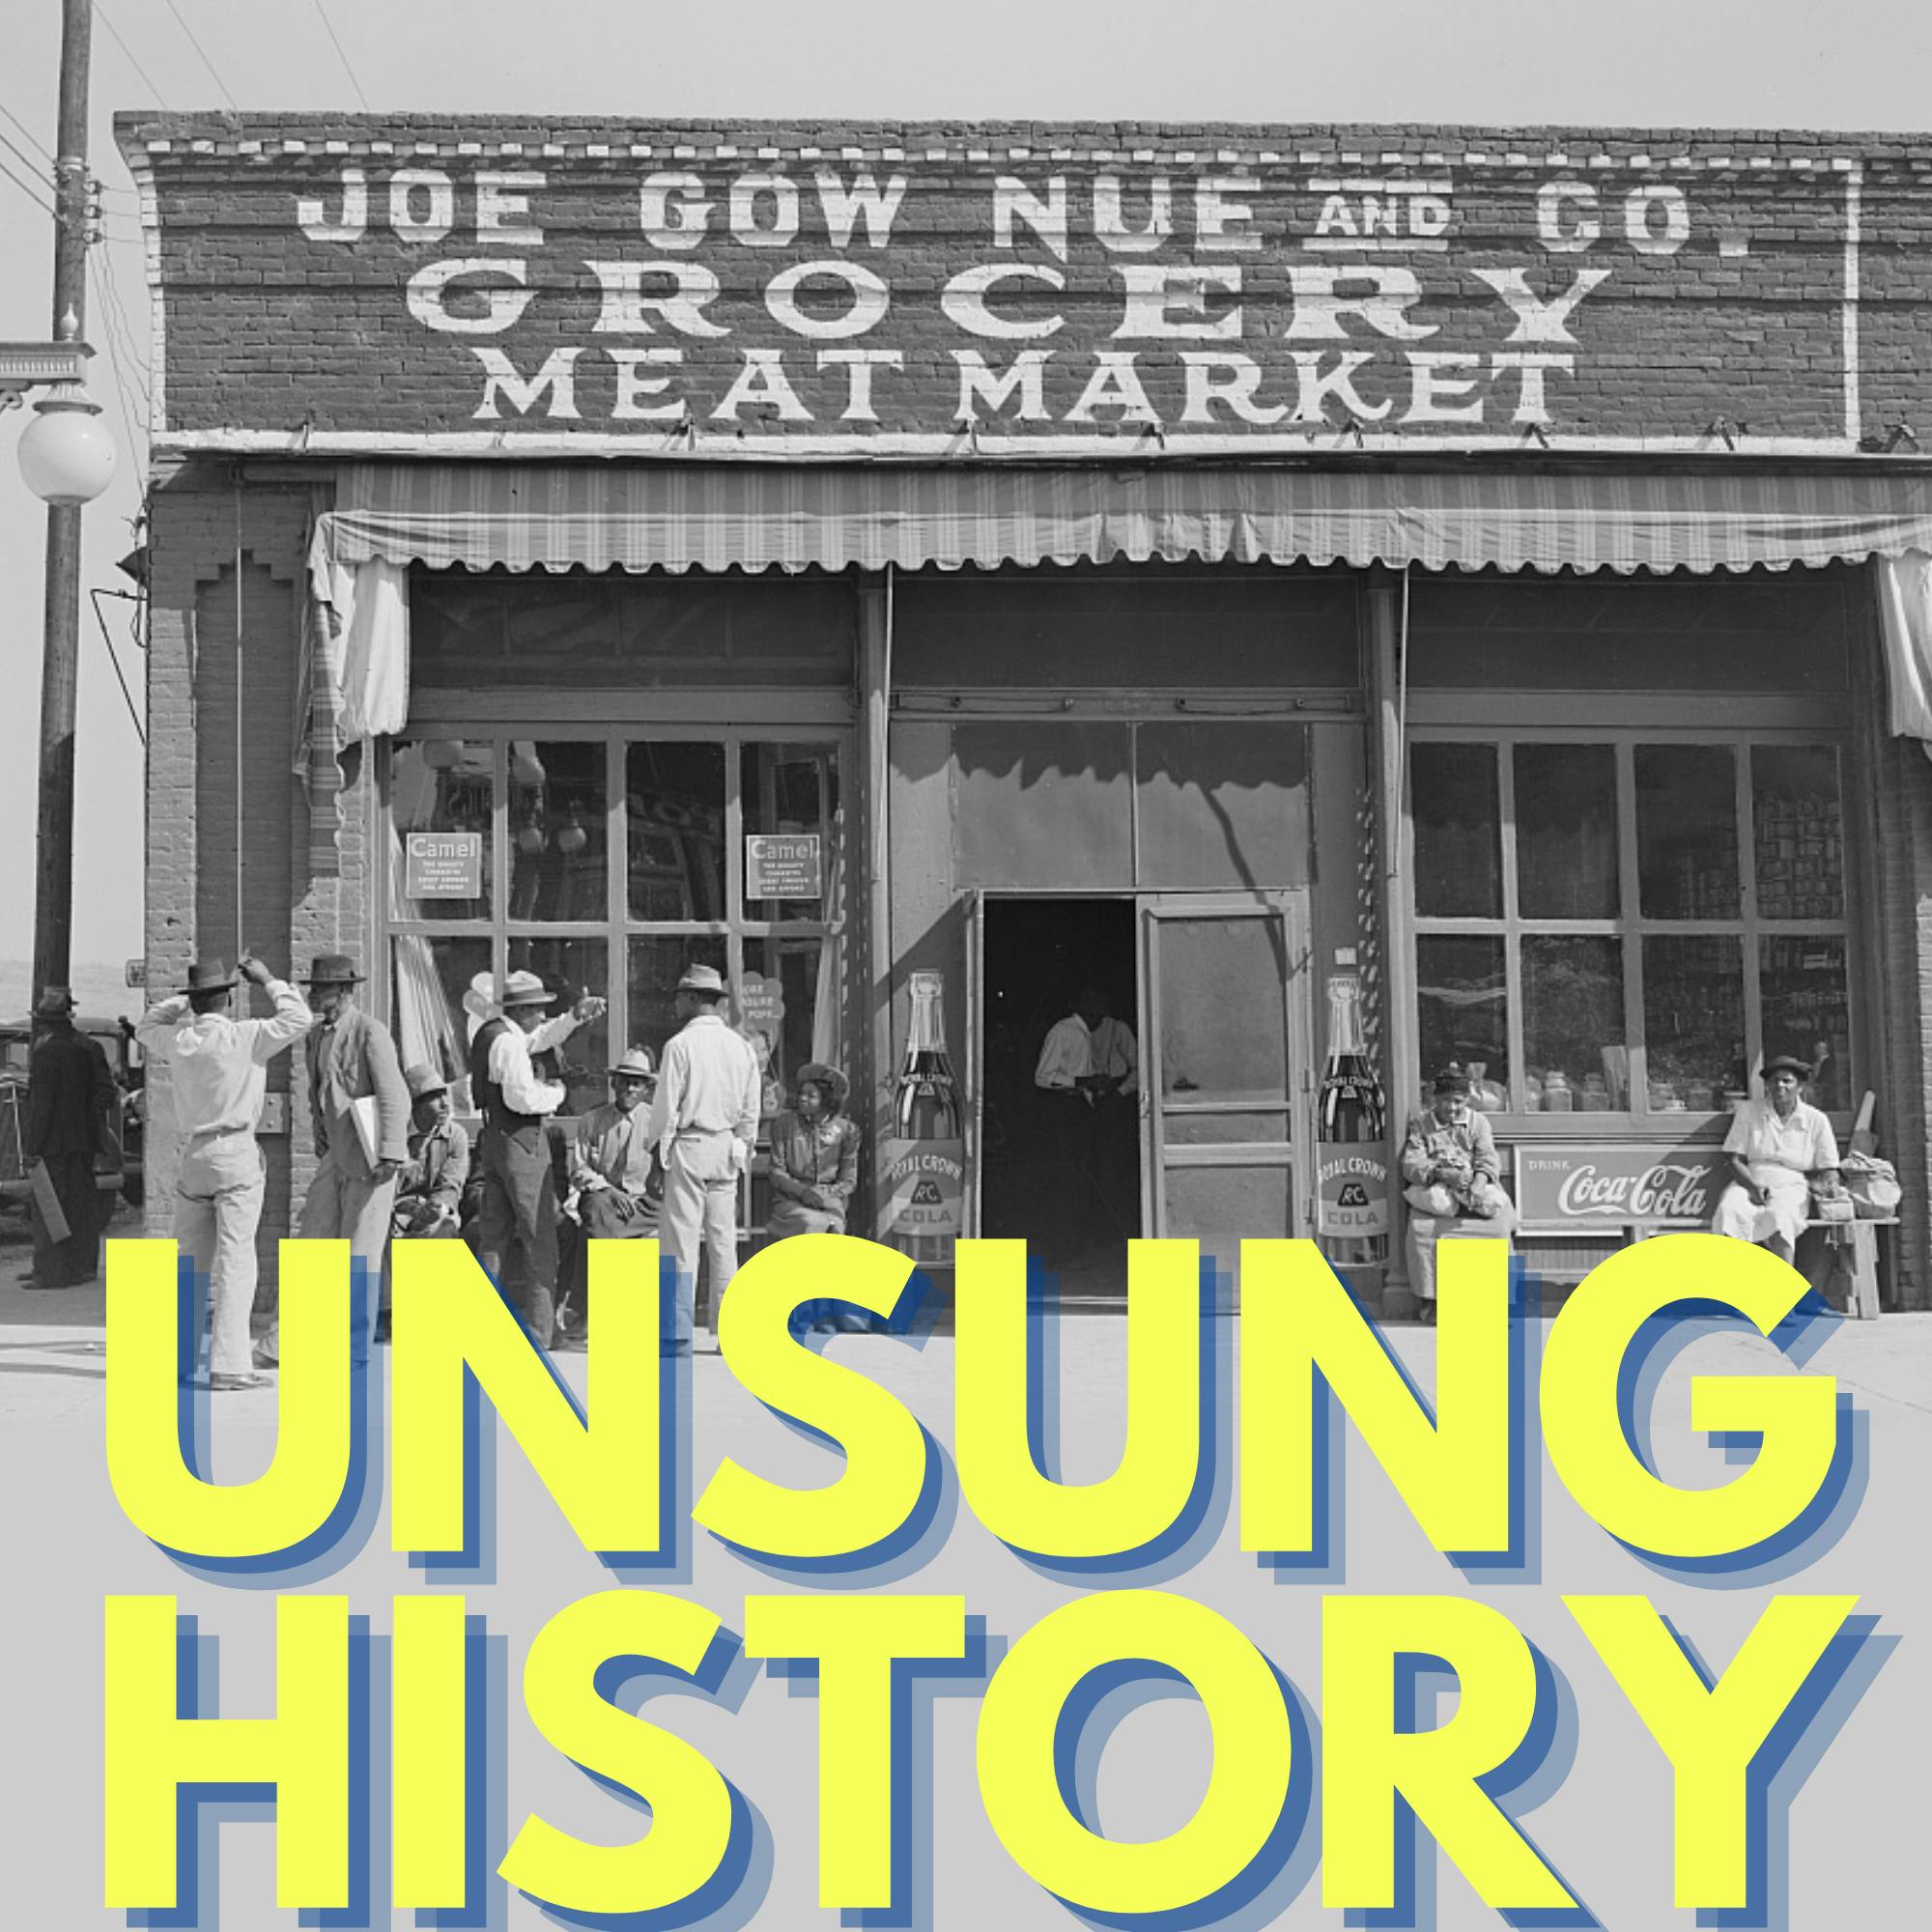 Chinese Grocery Stores in the Mississippi Delta